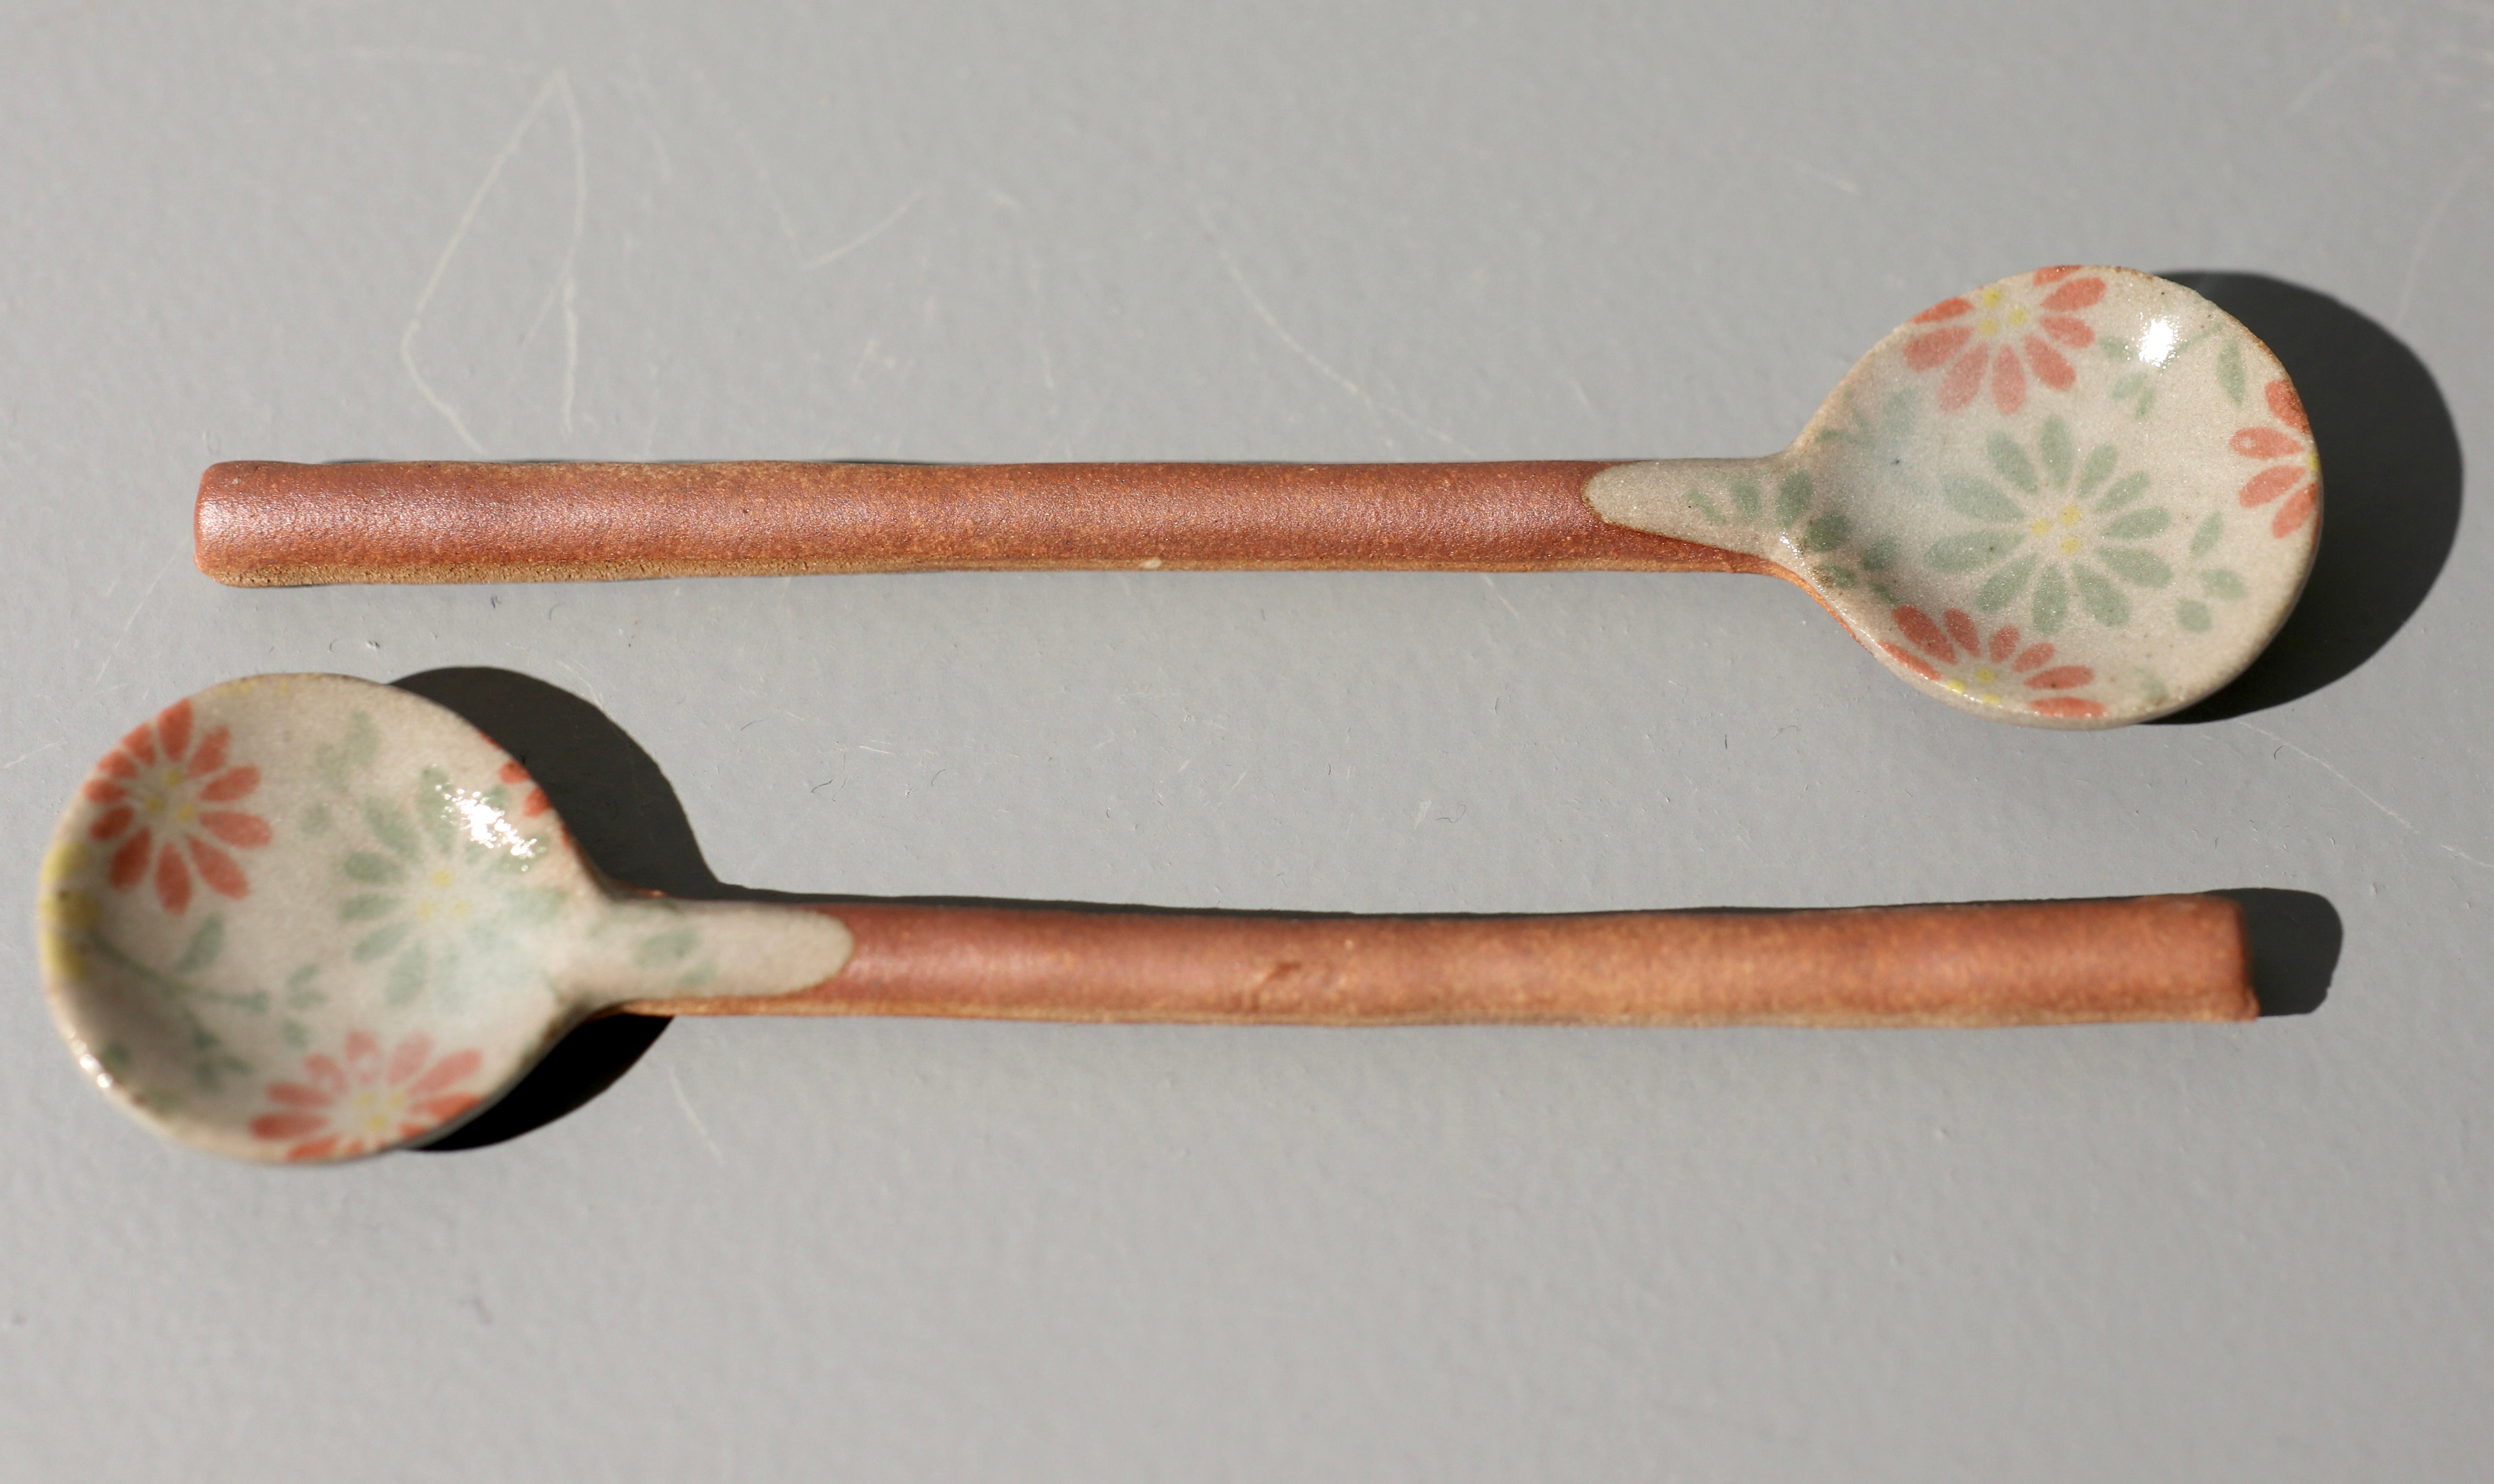 Ceramic spoon with multicolored flowers